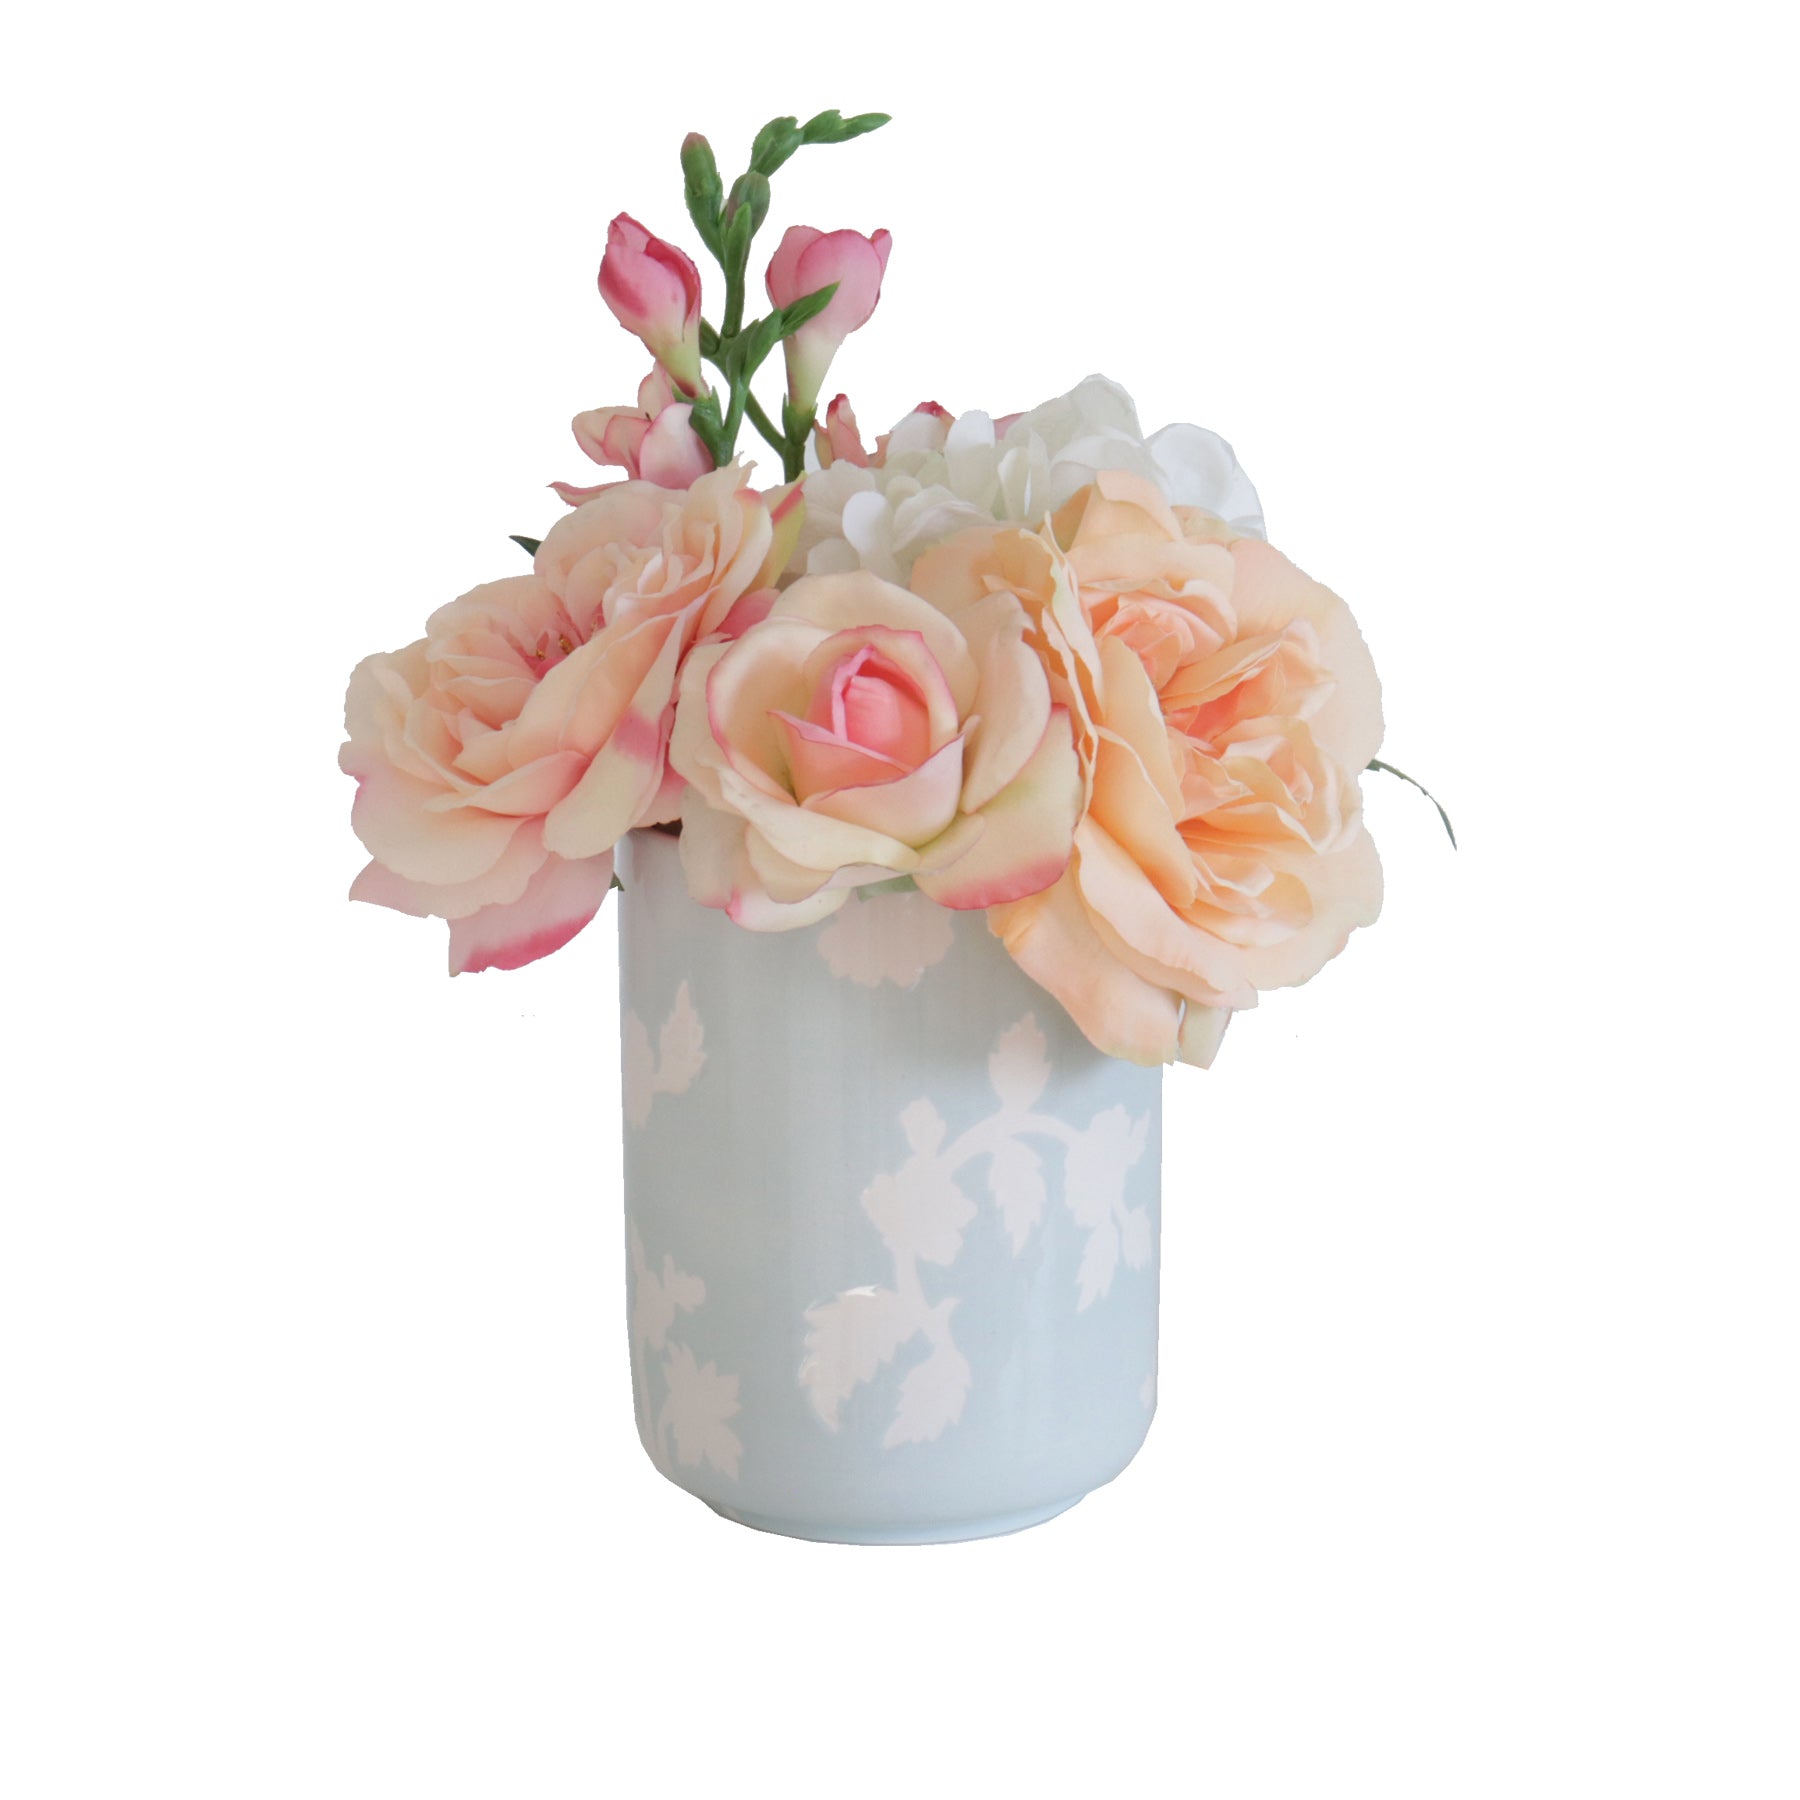 Flower holder vase — Amores by Kei Online Store